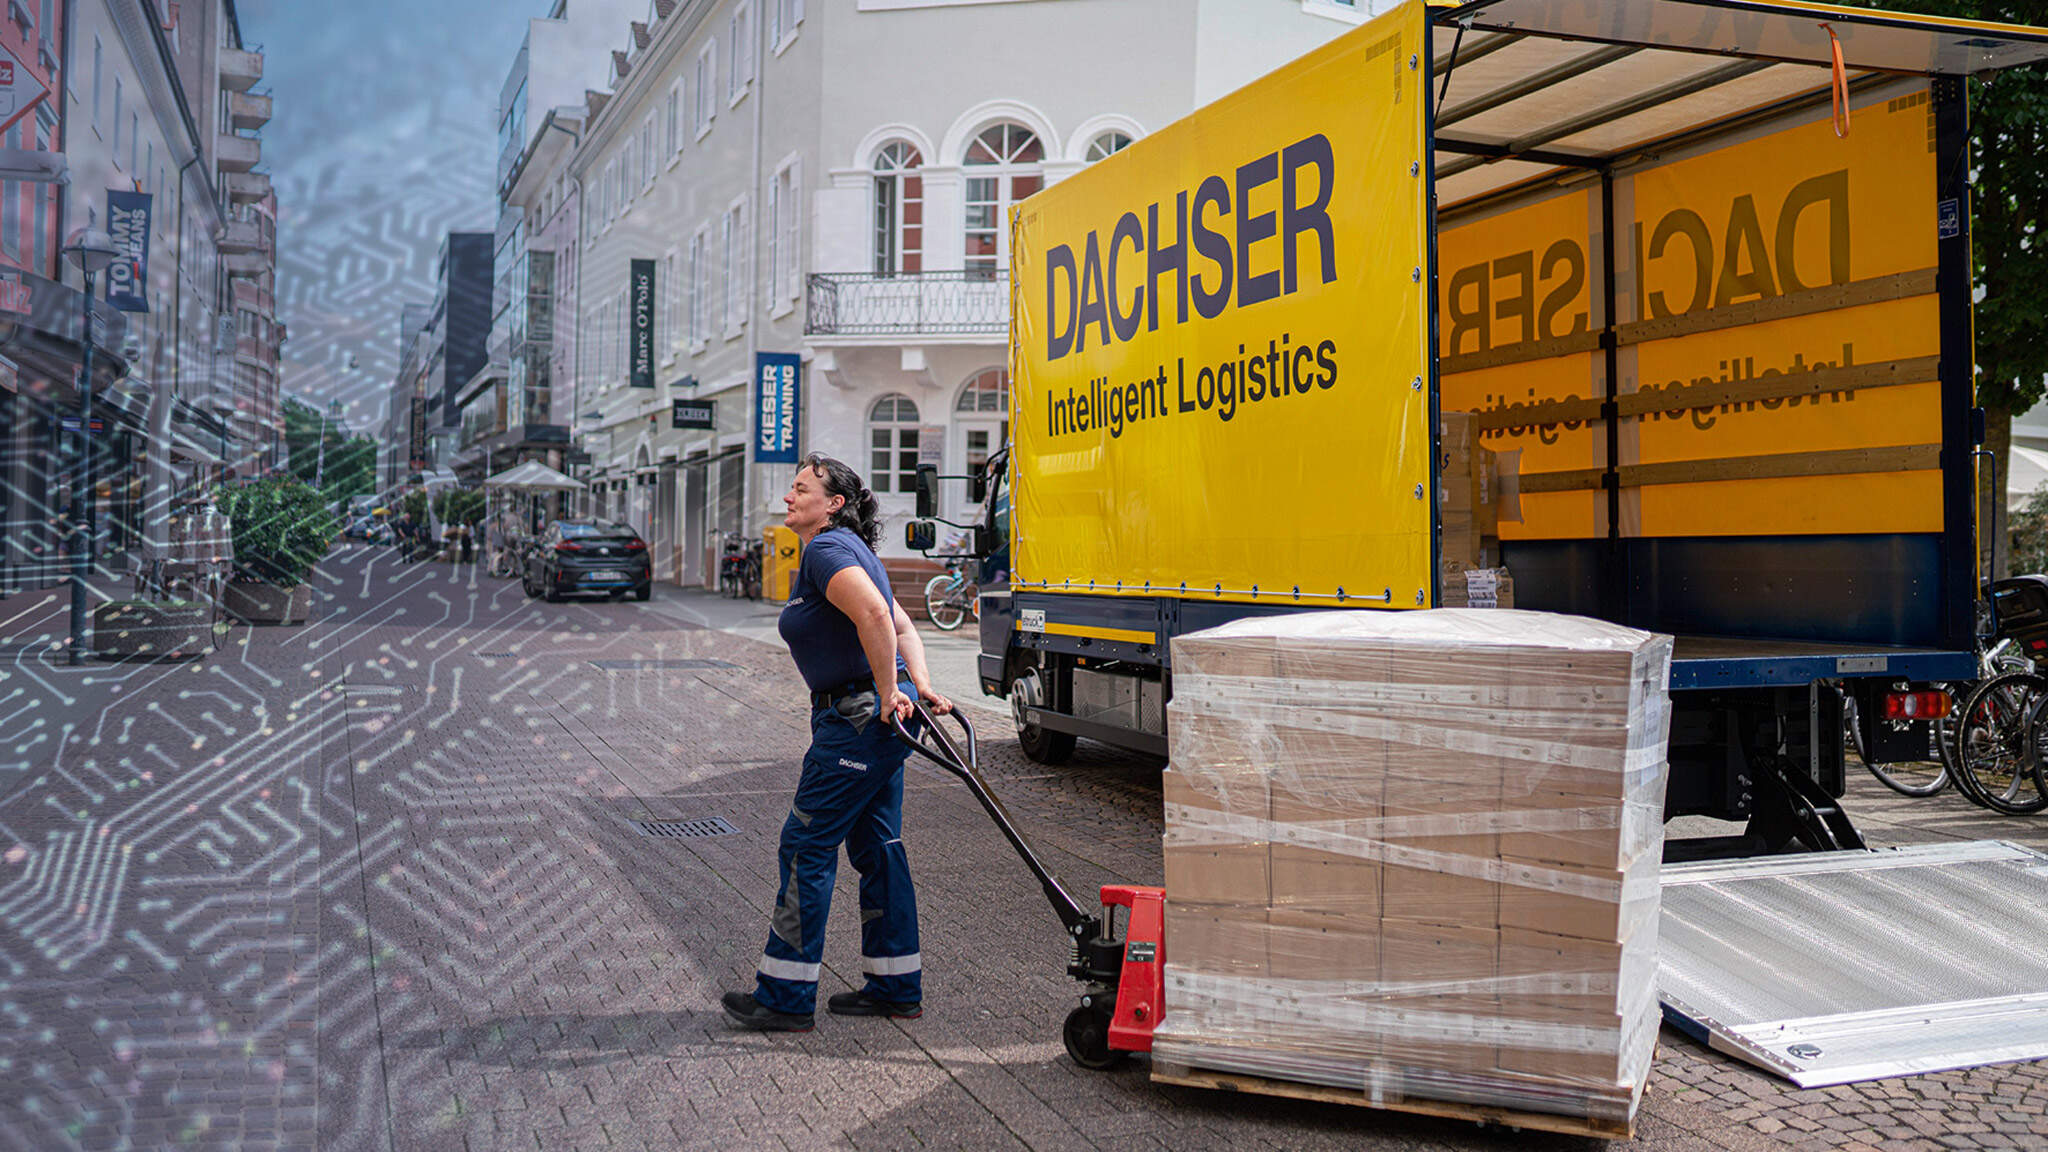 IT helps keep deliveries running smoothly.